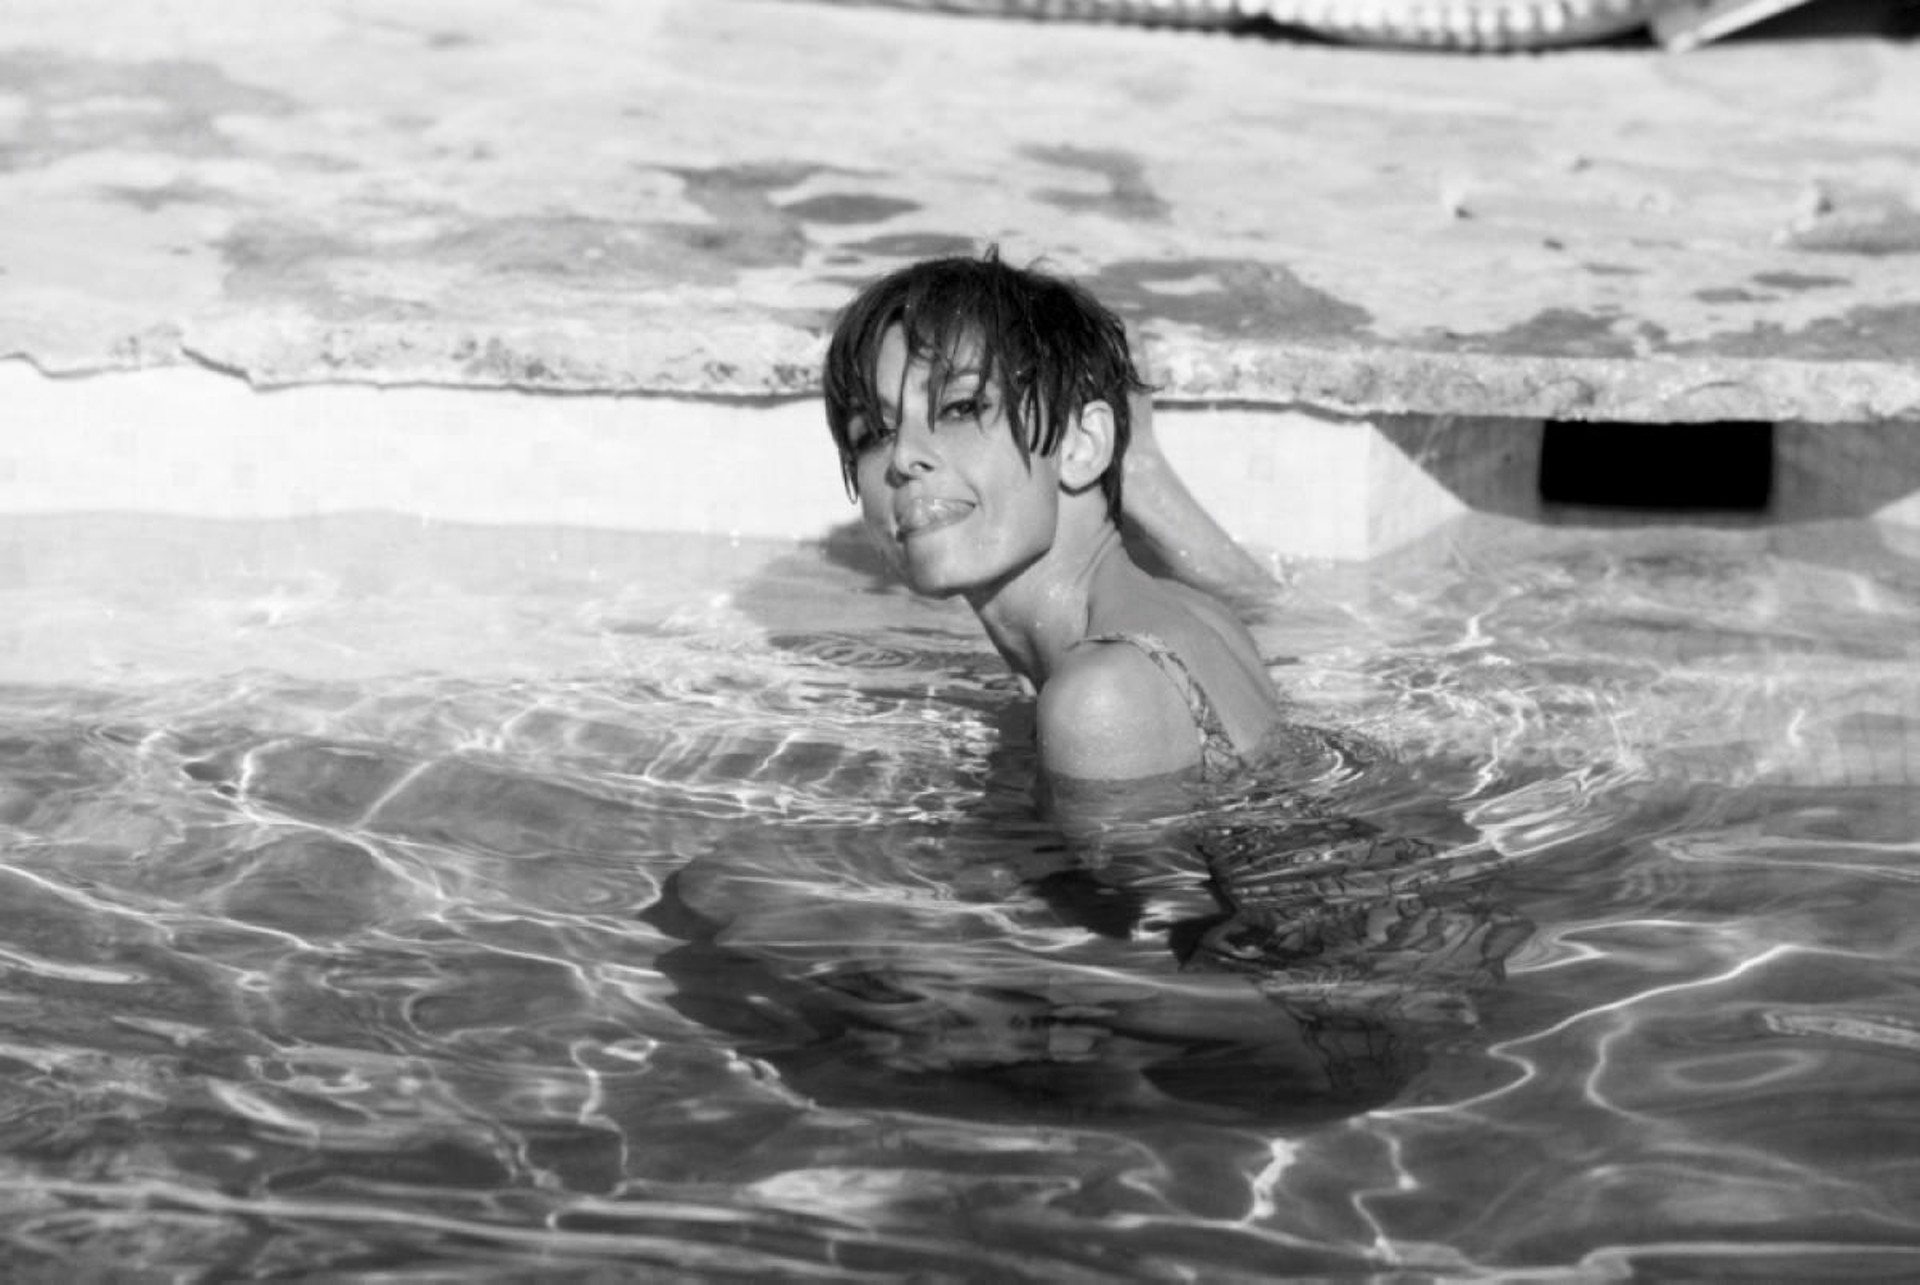 Audrey Hepburn in Pool by Terry O'Neill